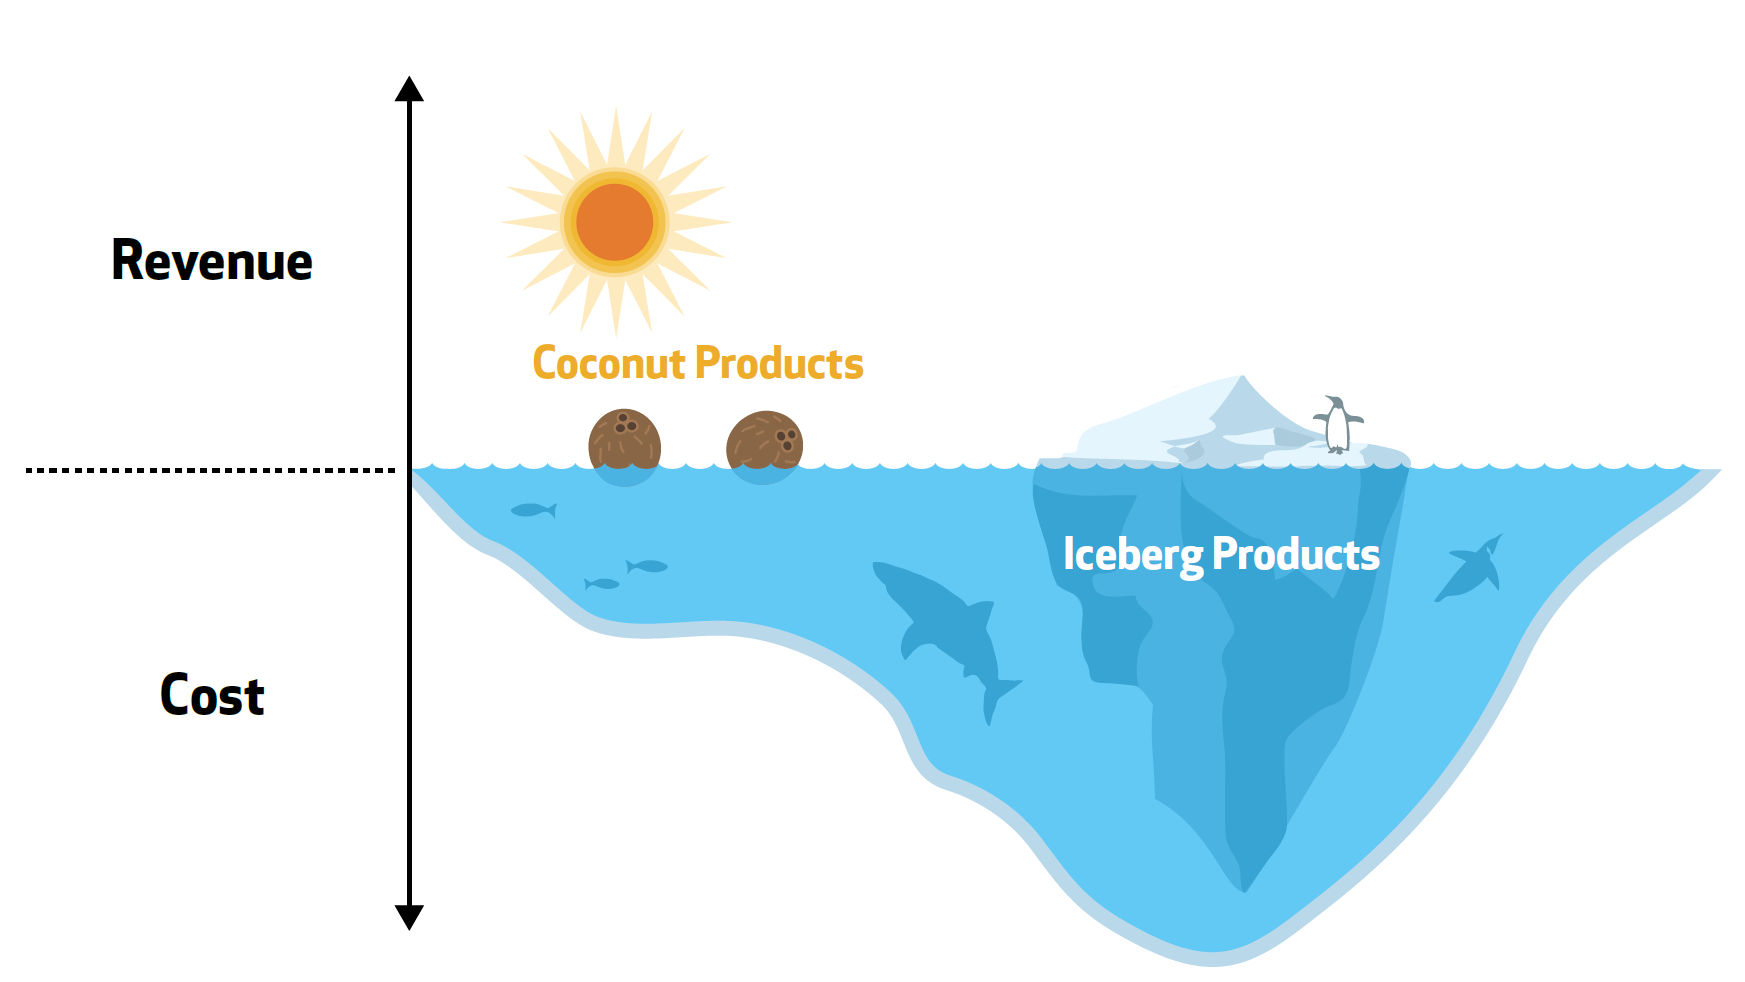 Iceberg and Coconut products